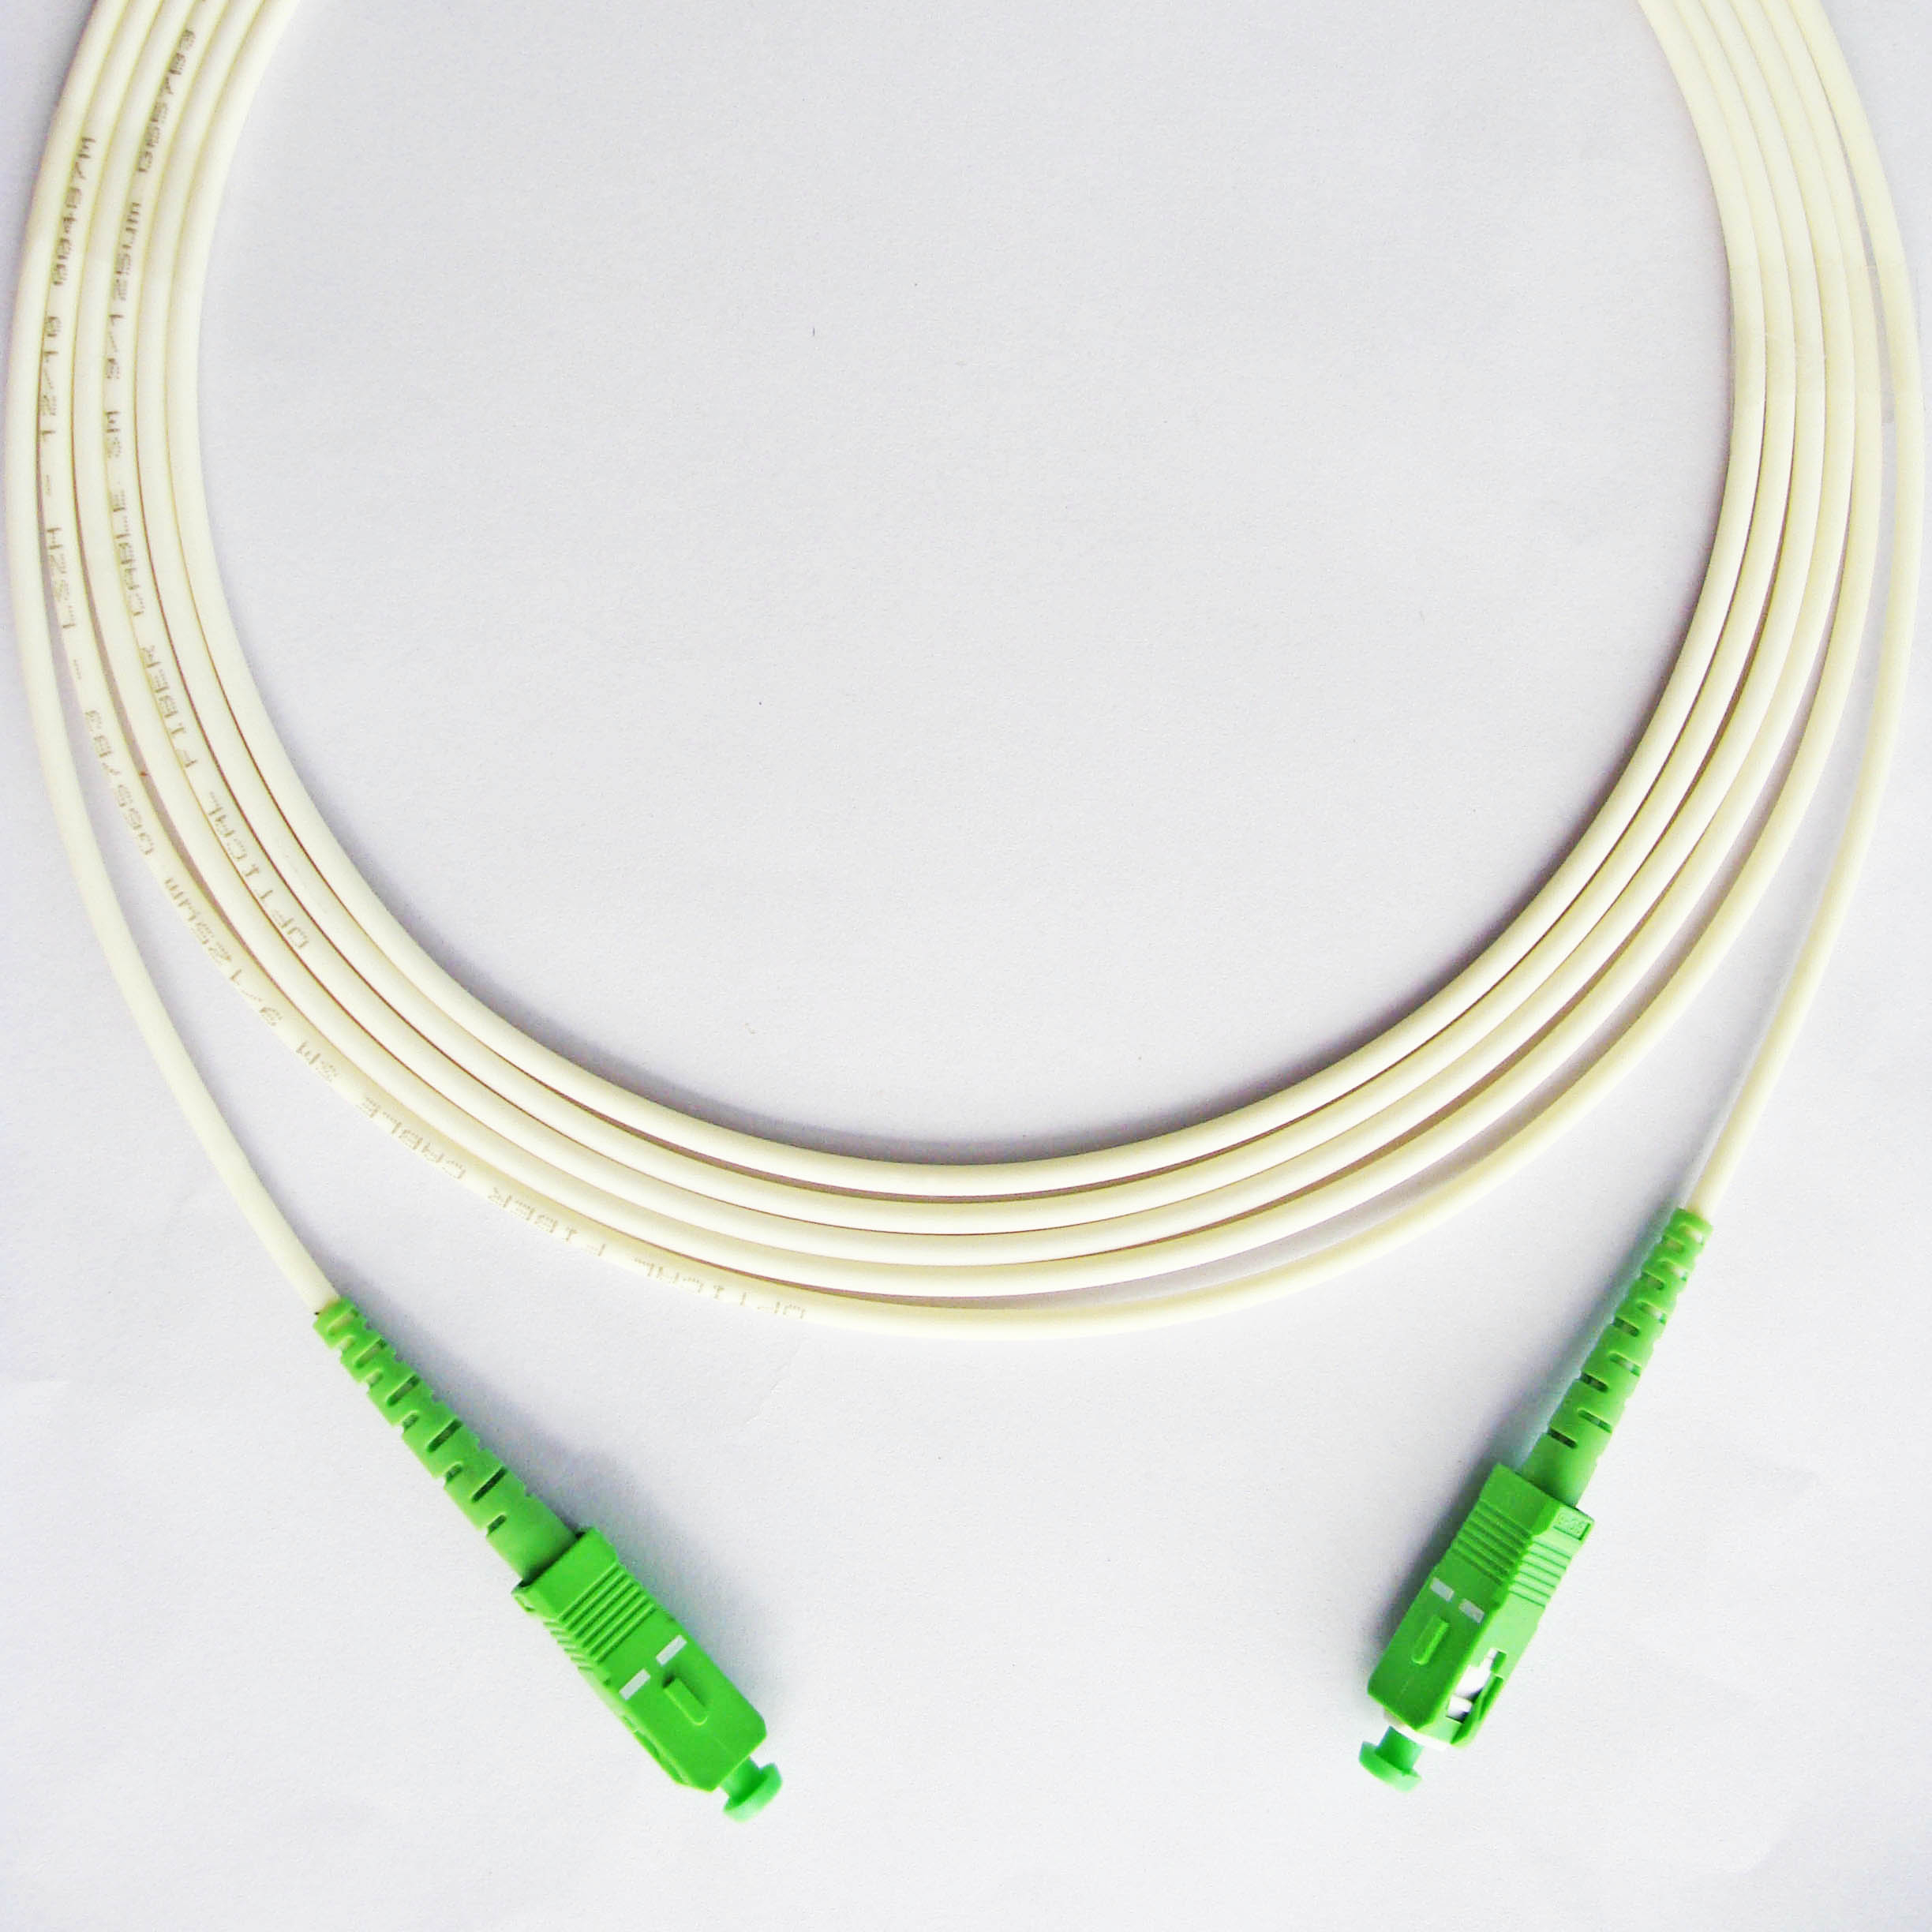 Indoor Outdoor NBN FIBRE OPTIC SC APC PATCH CORD FOR NTD MODEM to PCD CONNECTION